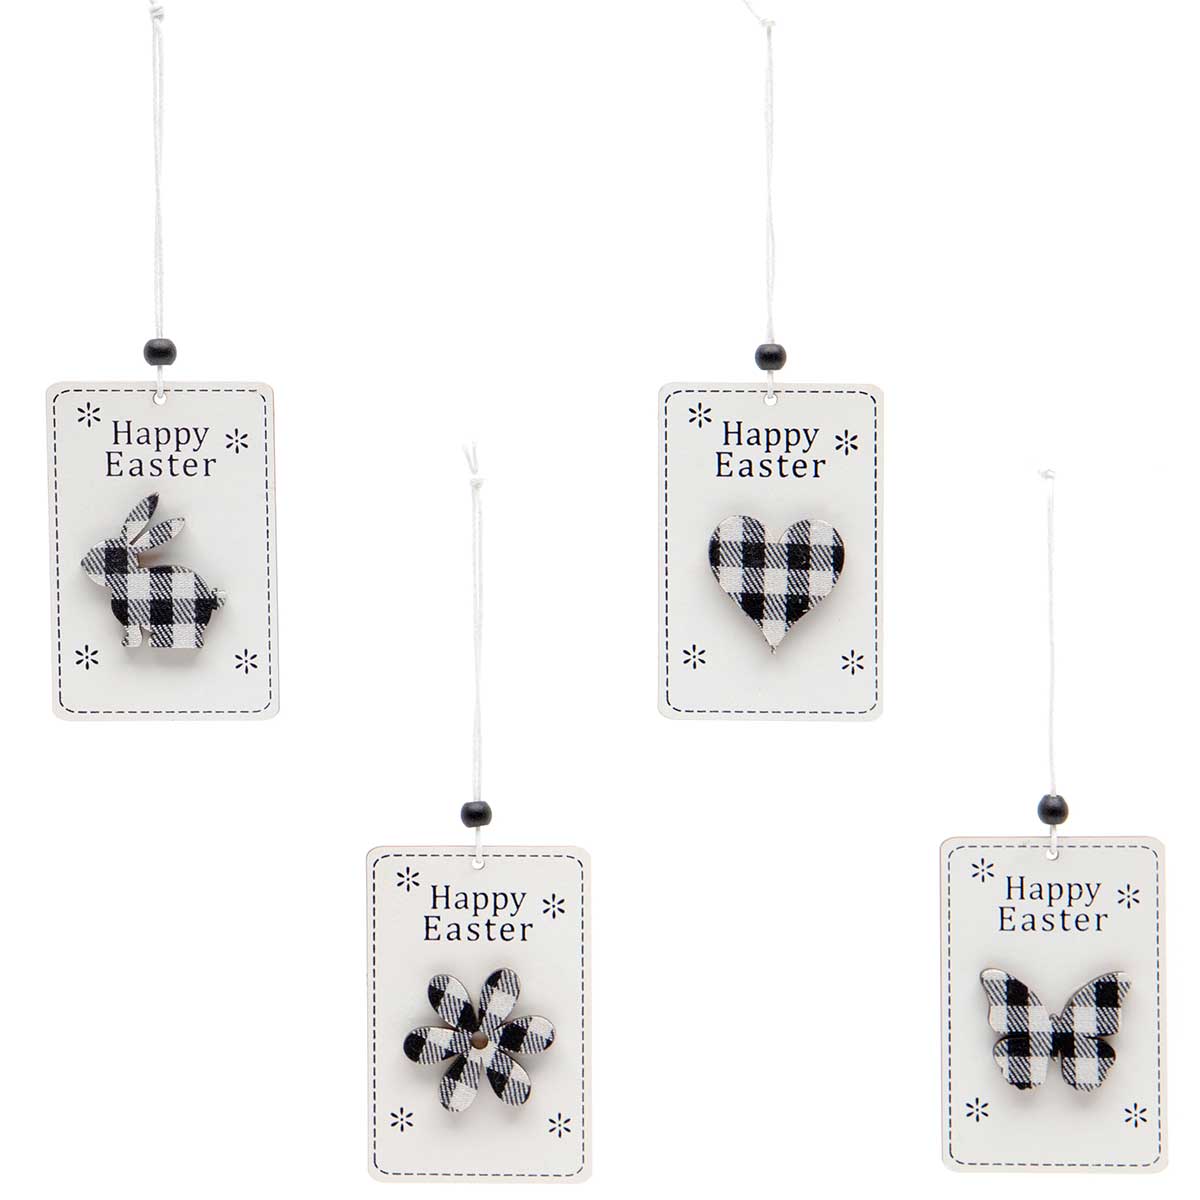 ORNAMENT EASTER TAG 4 ASSORTED 2.25IN X .25IN X 3.25IN WOOD